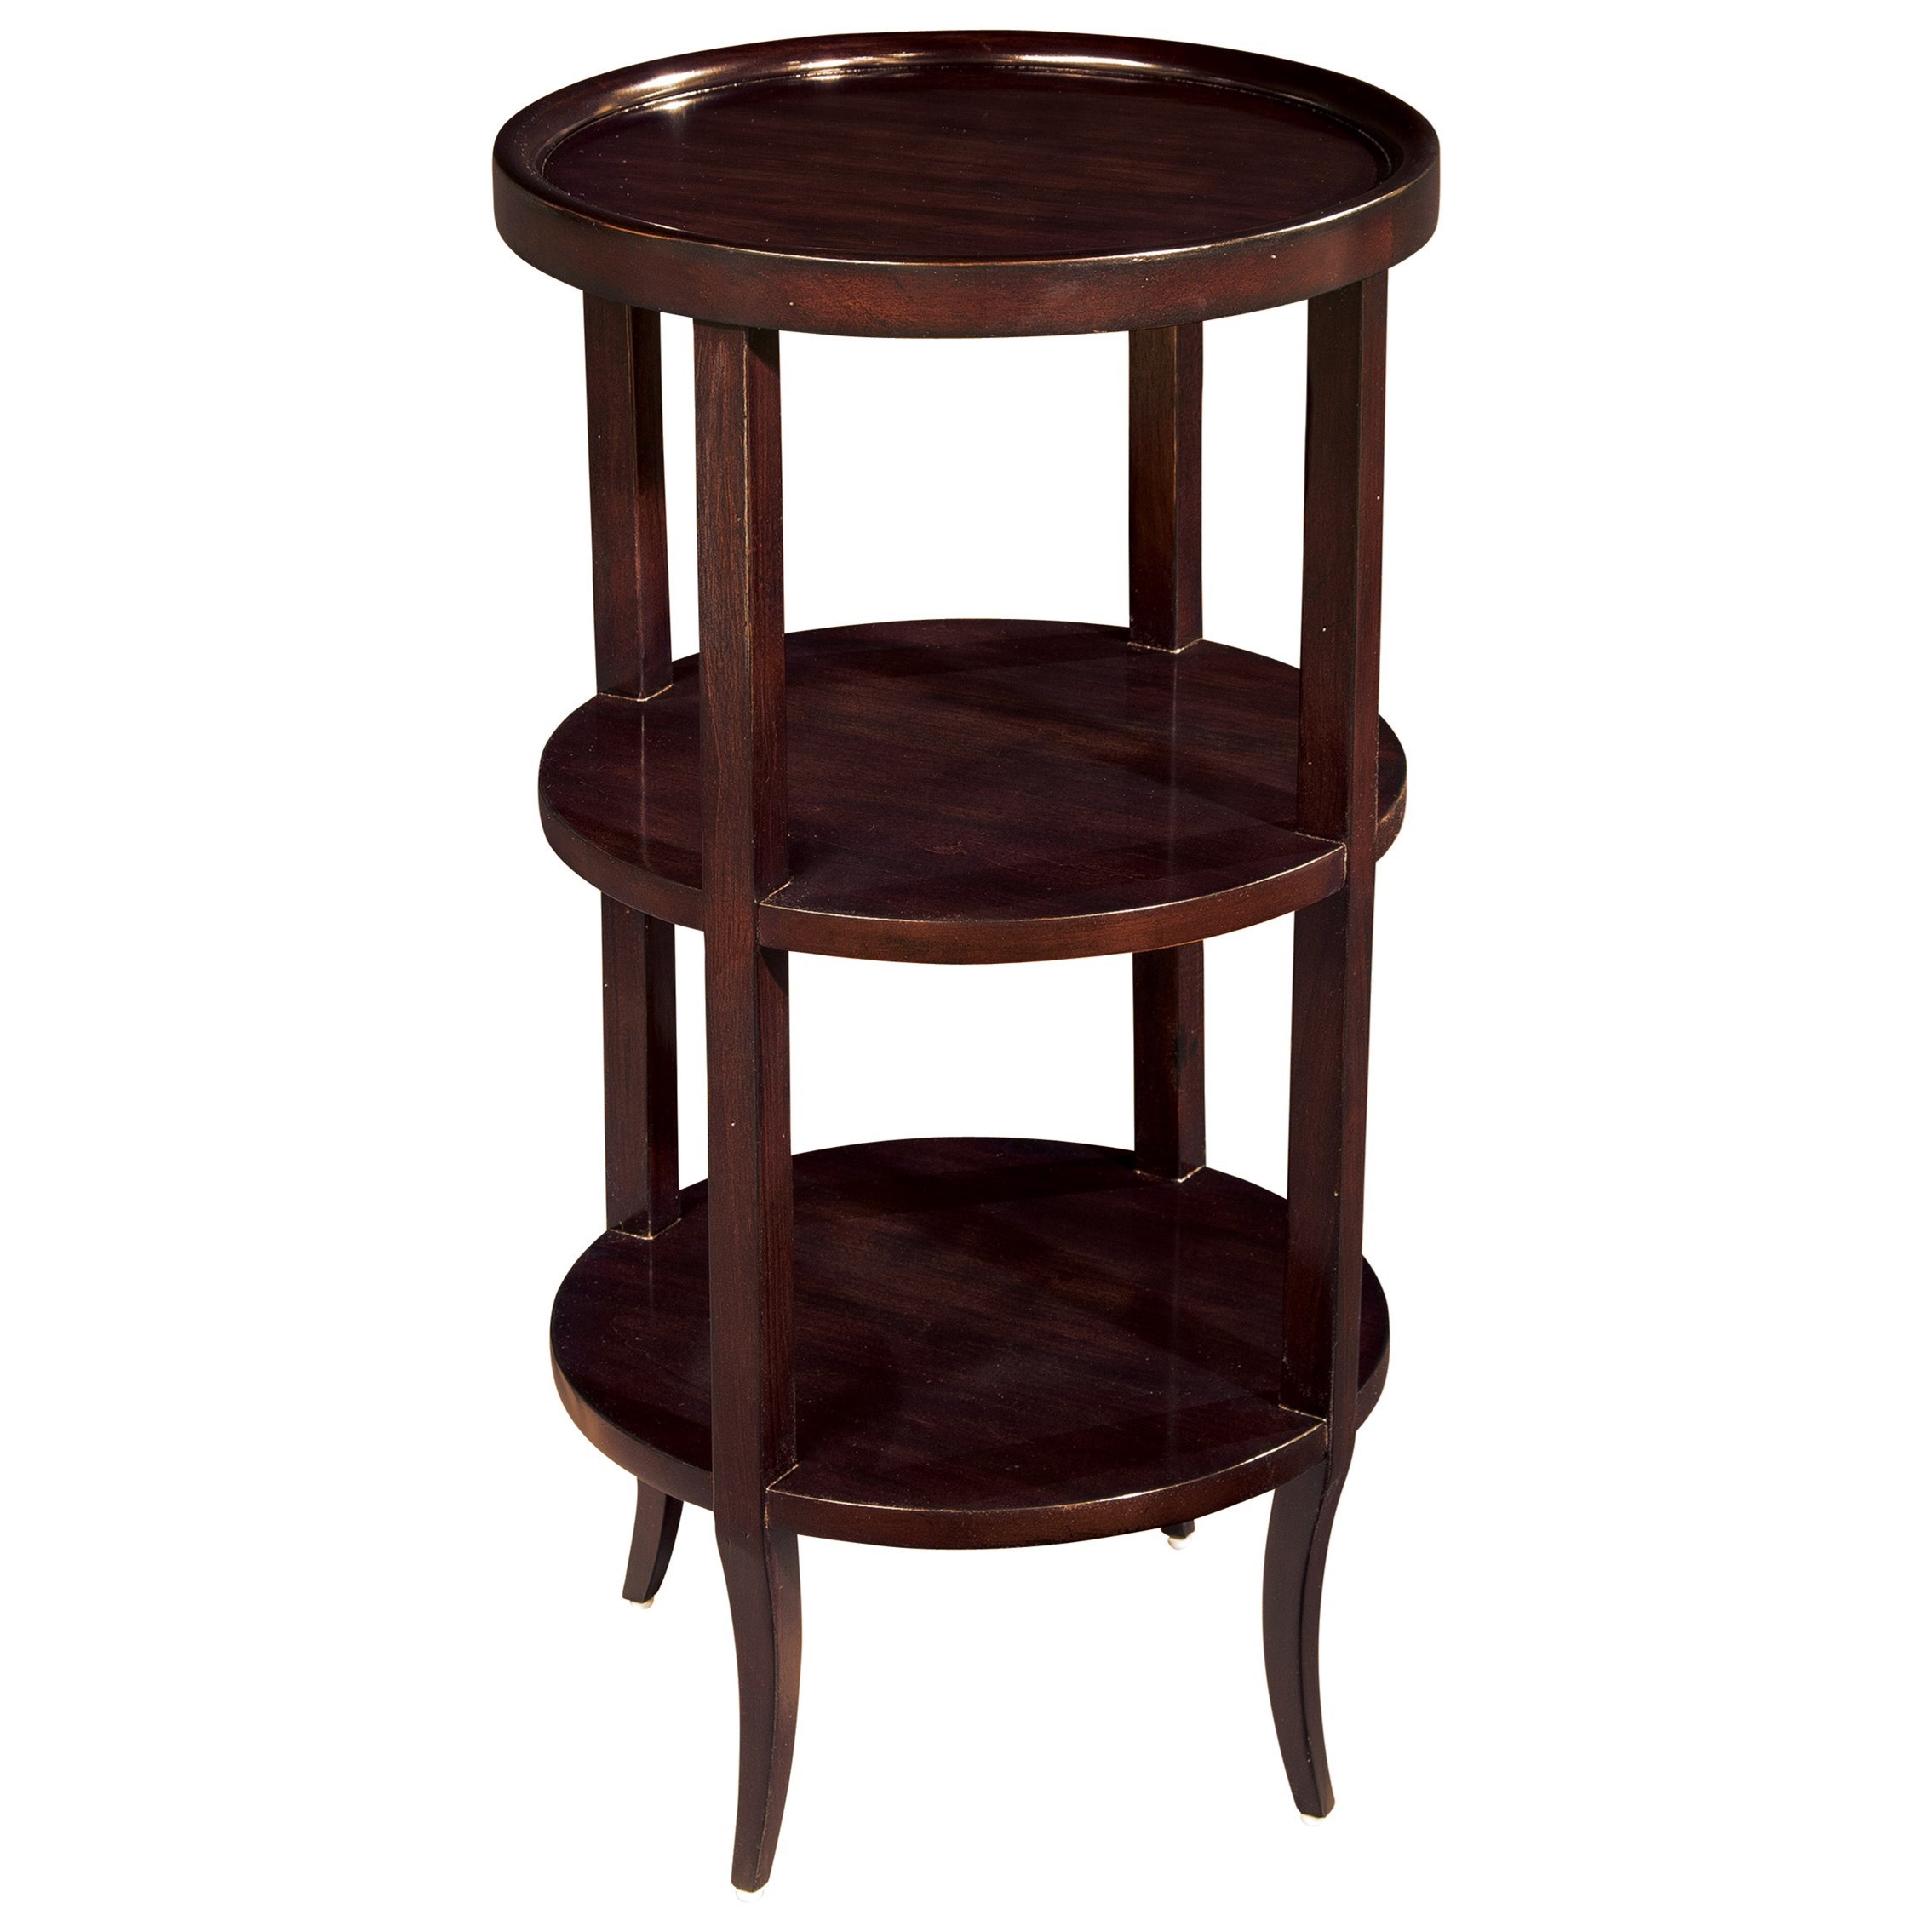 Round Accent Table with 2 Shelves